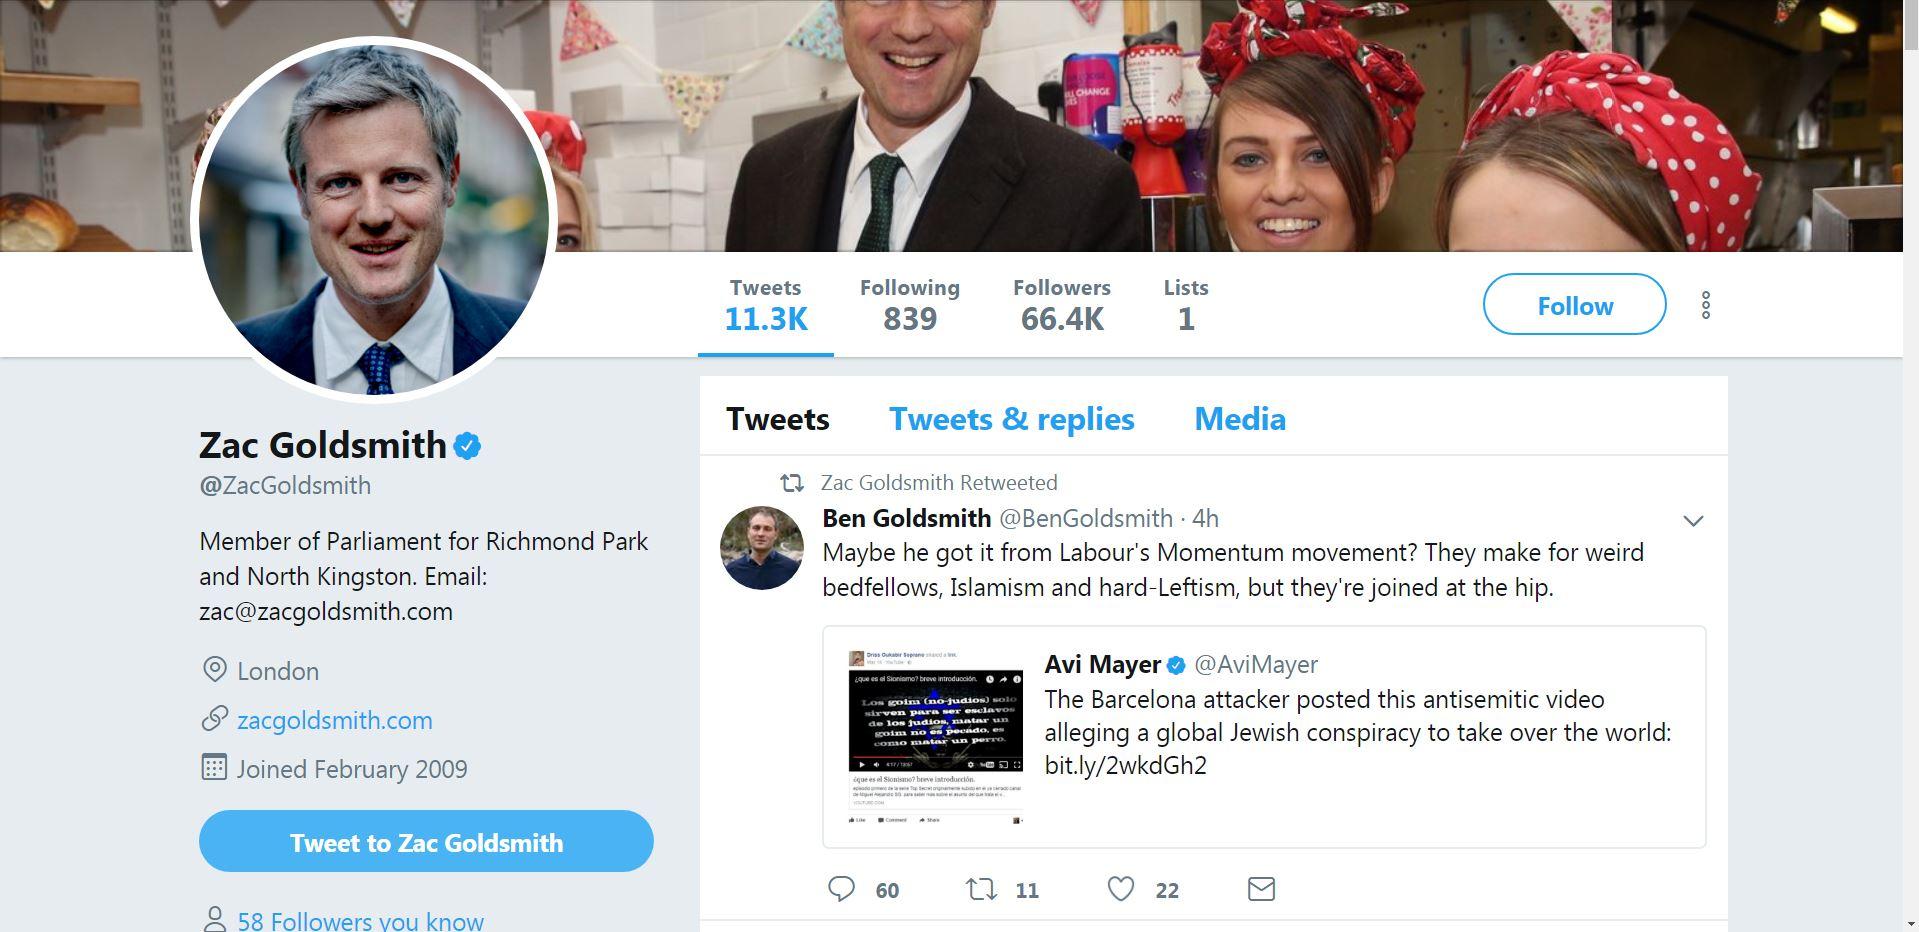 Mr Goldsmith retweeted his brother, Ben, on his social media account